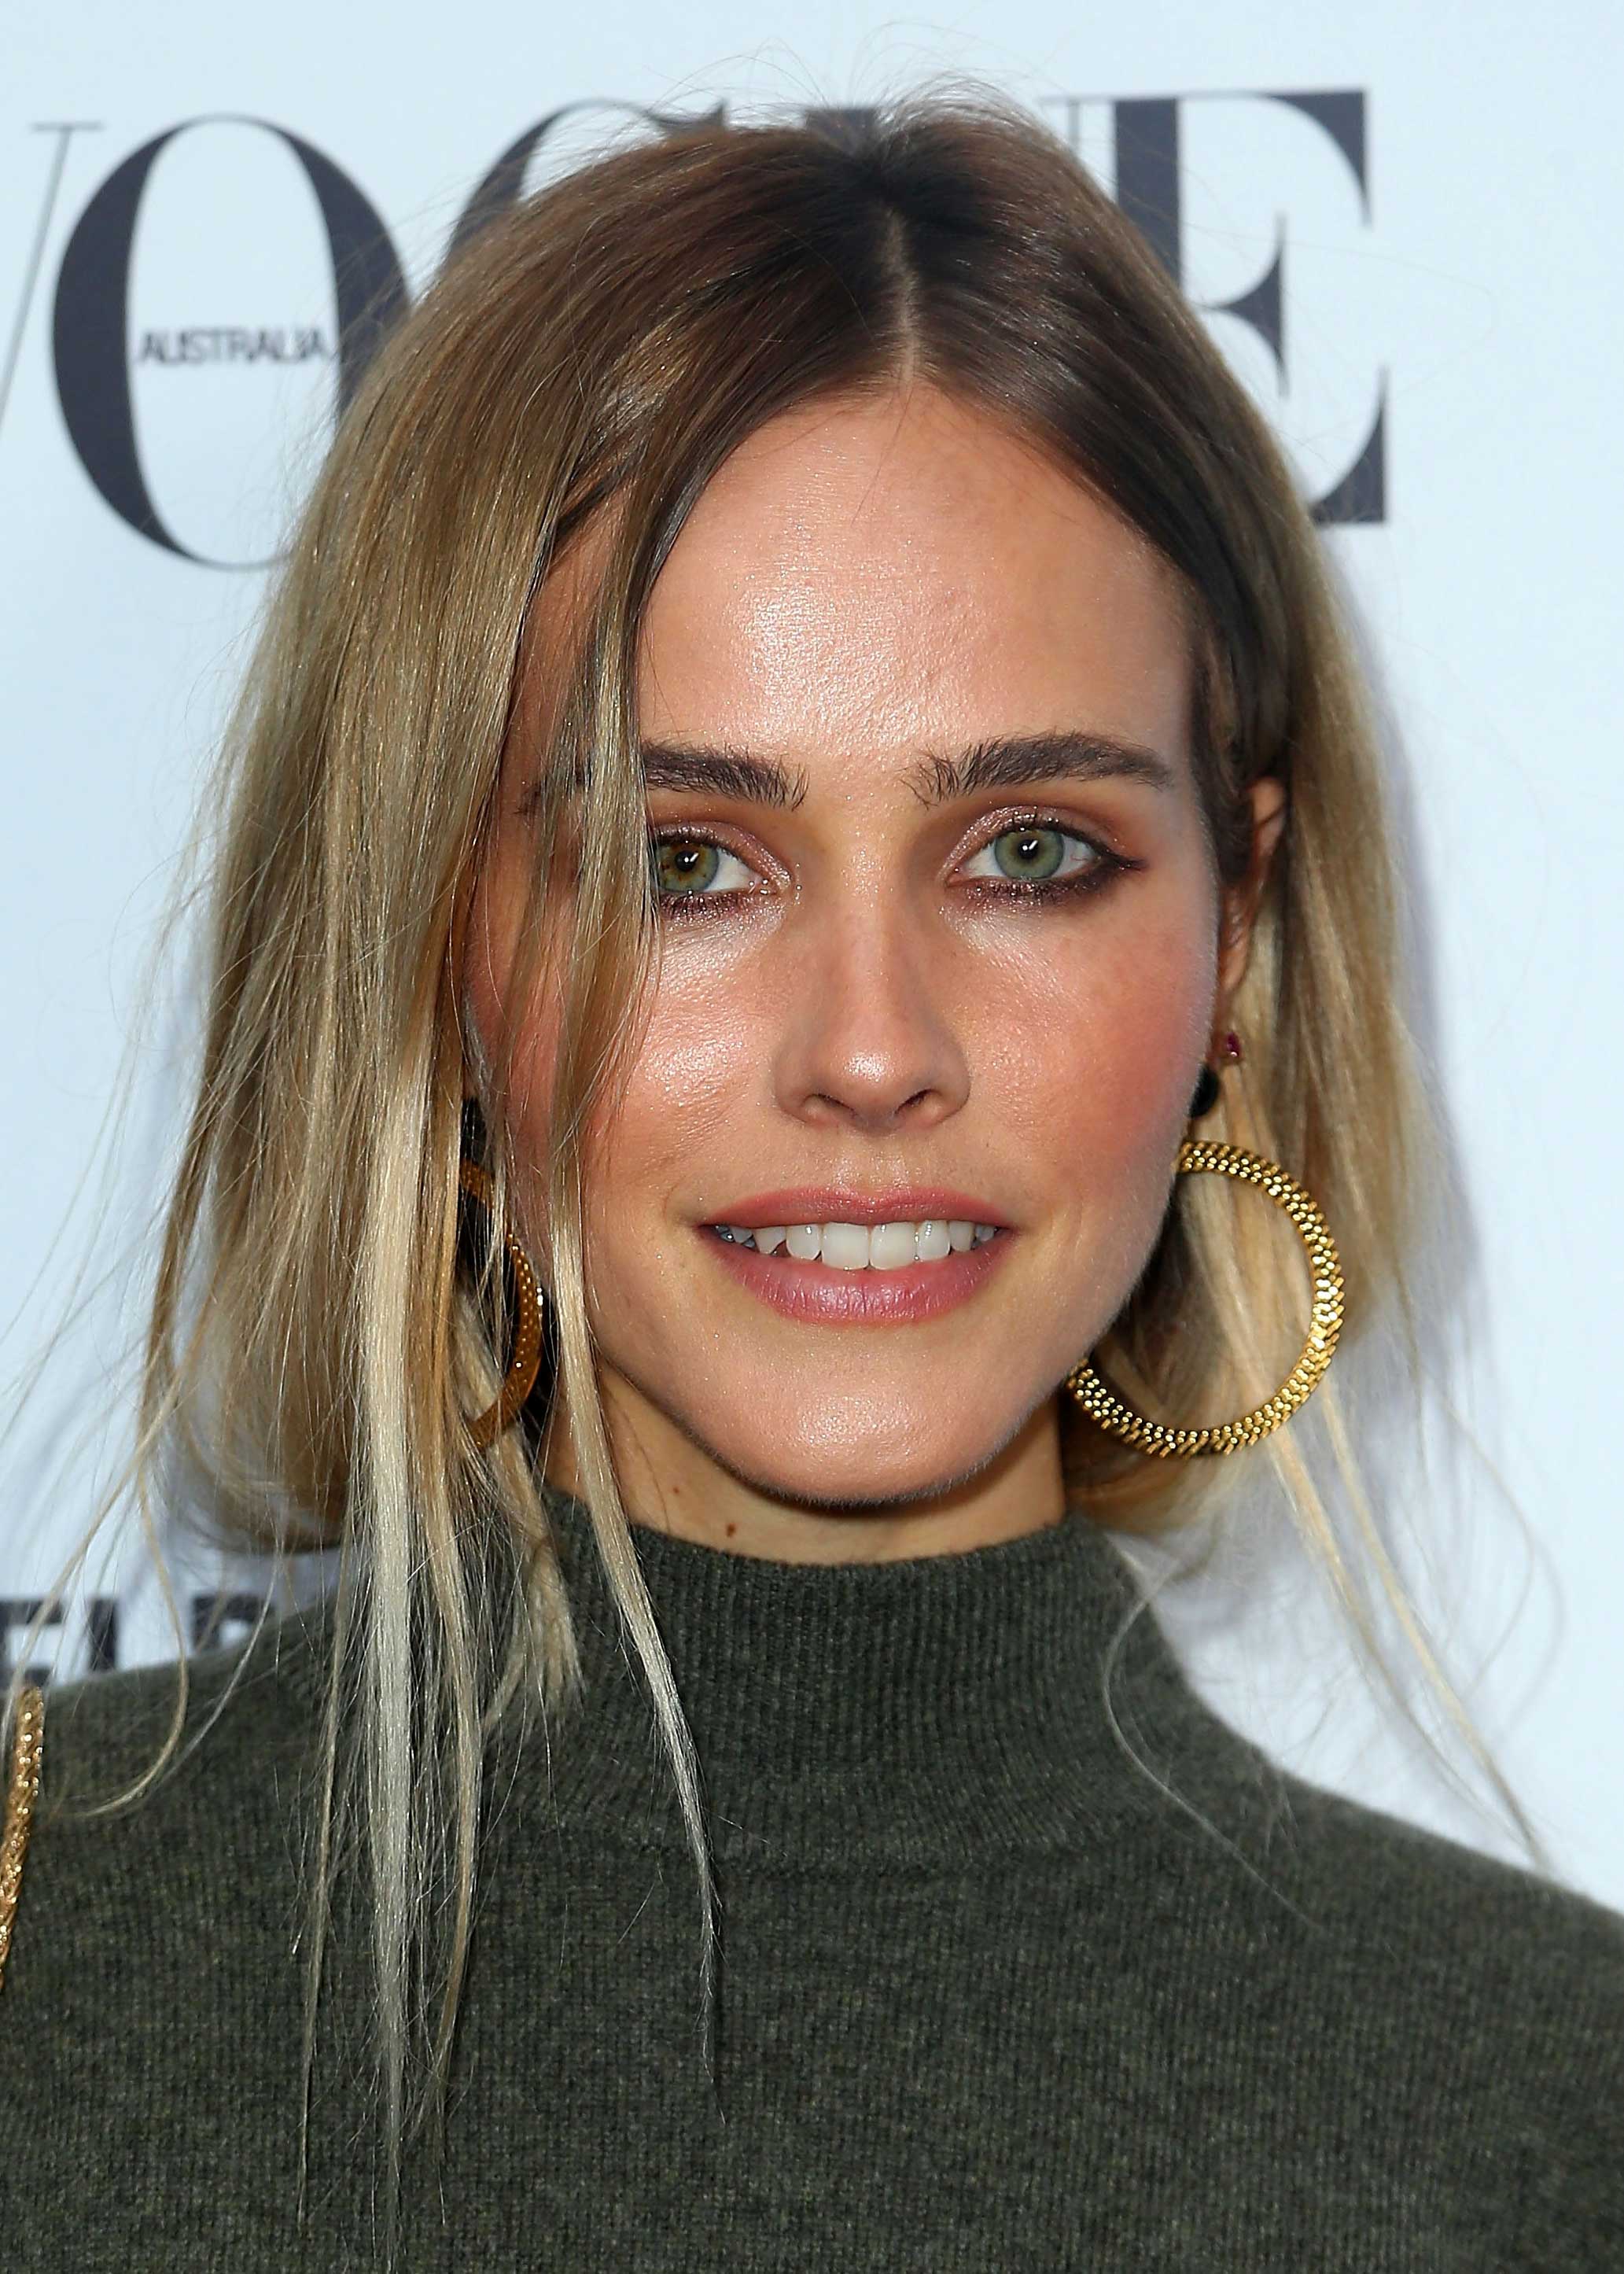 23+ amazing Images of Isabel Lucas Miran Gallery